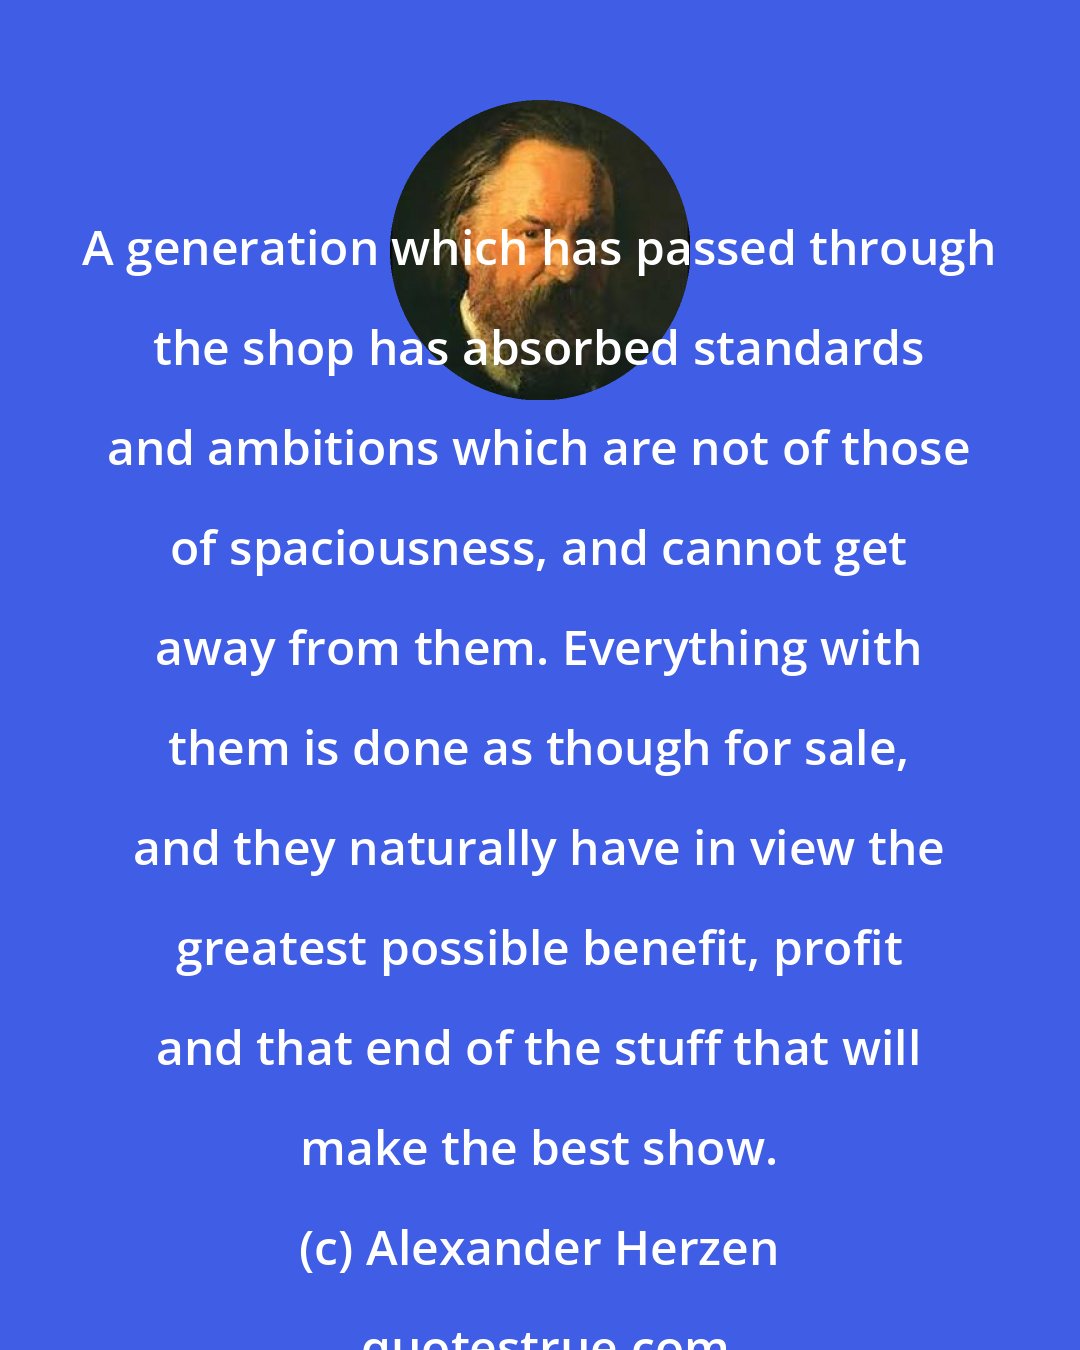 Alexander Herzen: A generation which has passed through the shop has absorbed standards and ambitions which are not of those of spaciousness, and cannot get away from them. Everything with them is done as though for sale, and they naturally have in view the greatest possible benefit, profit and that end of the stuff that will make the best show.